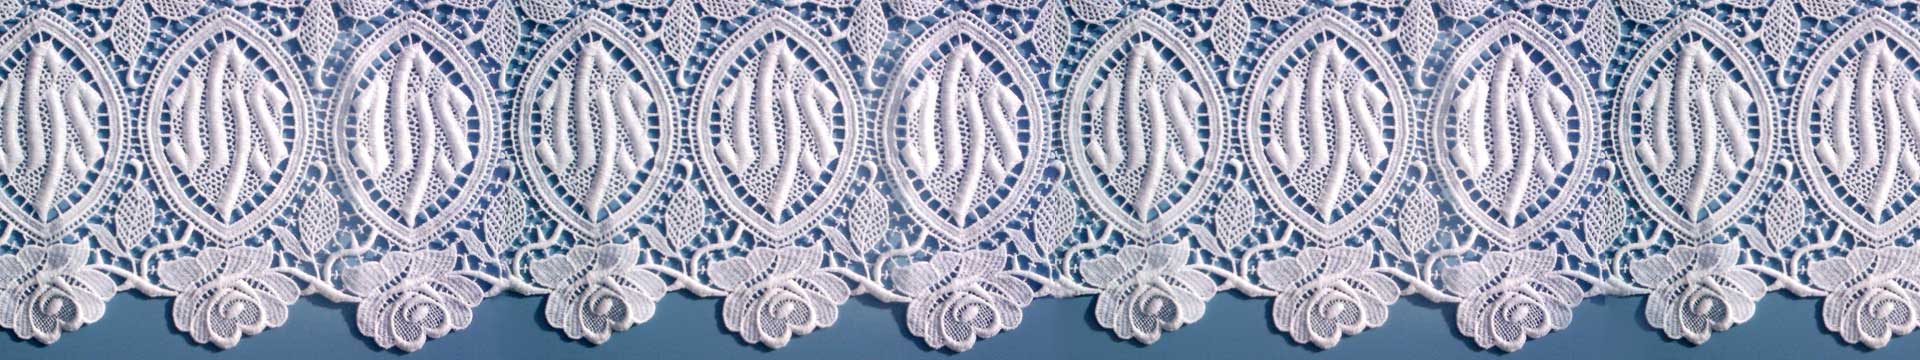 altar linens lace banner by lynn smith